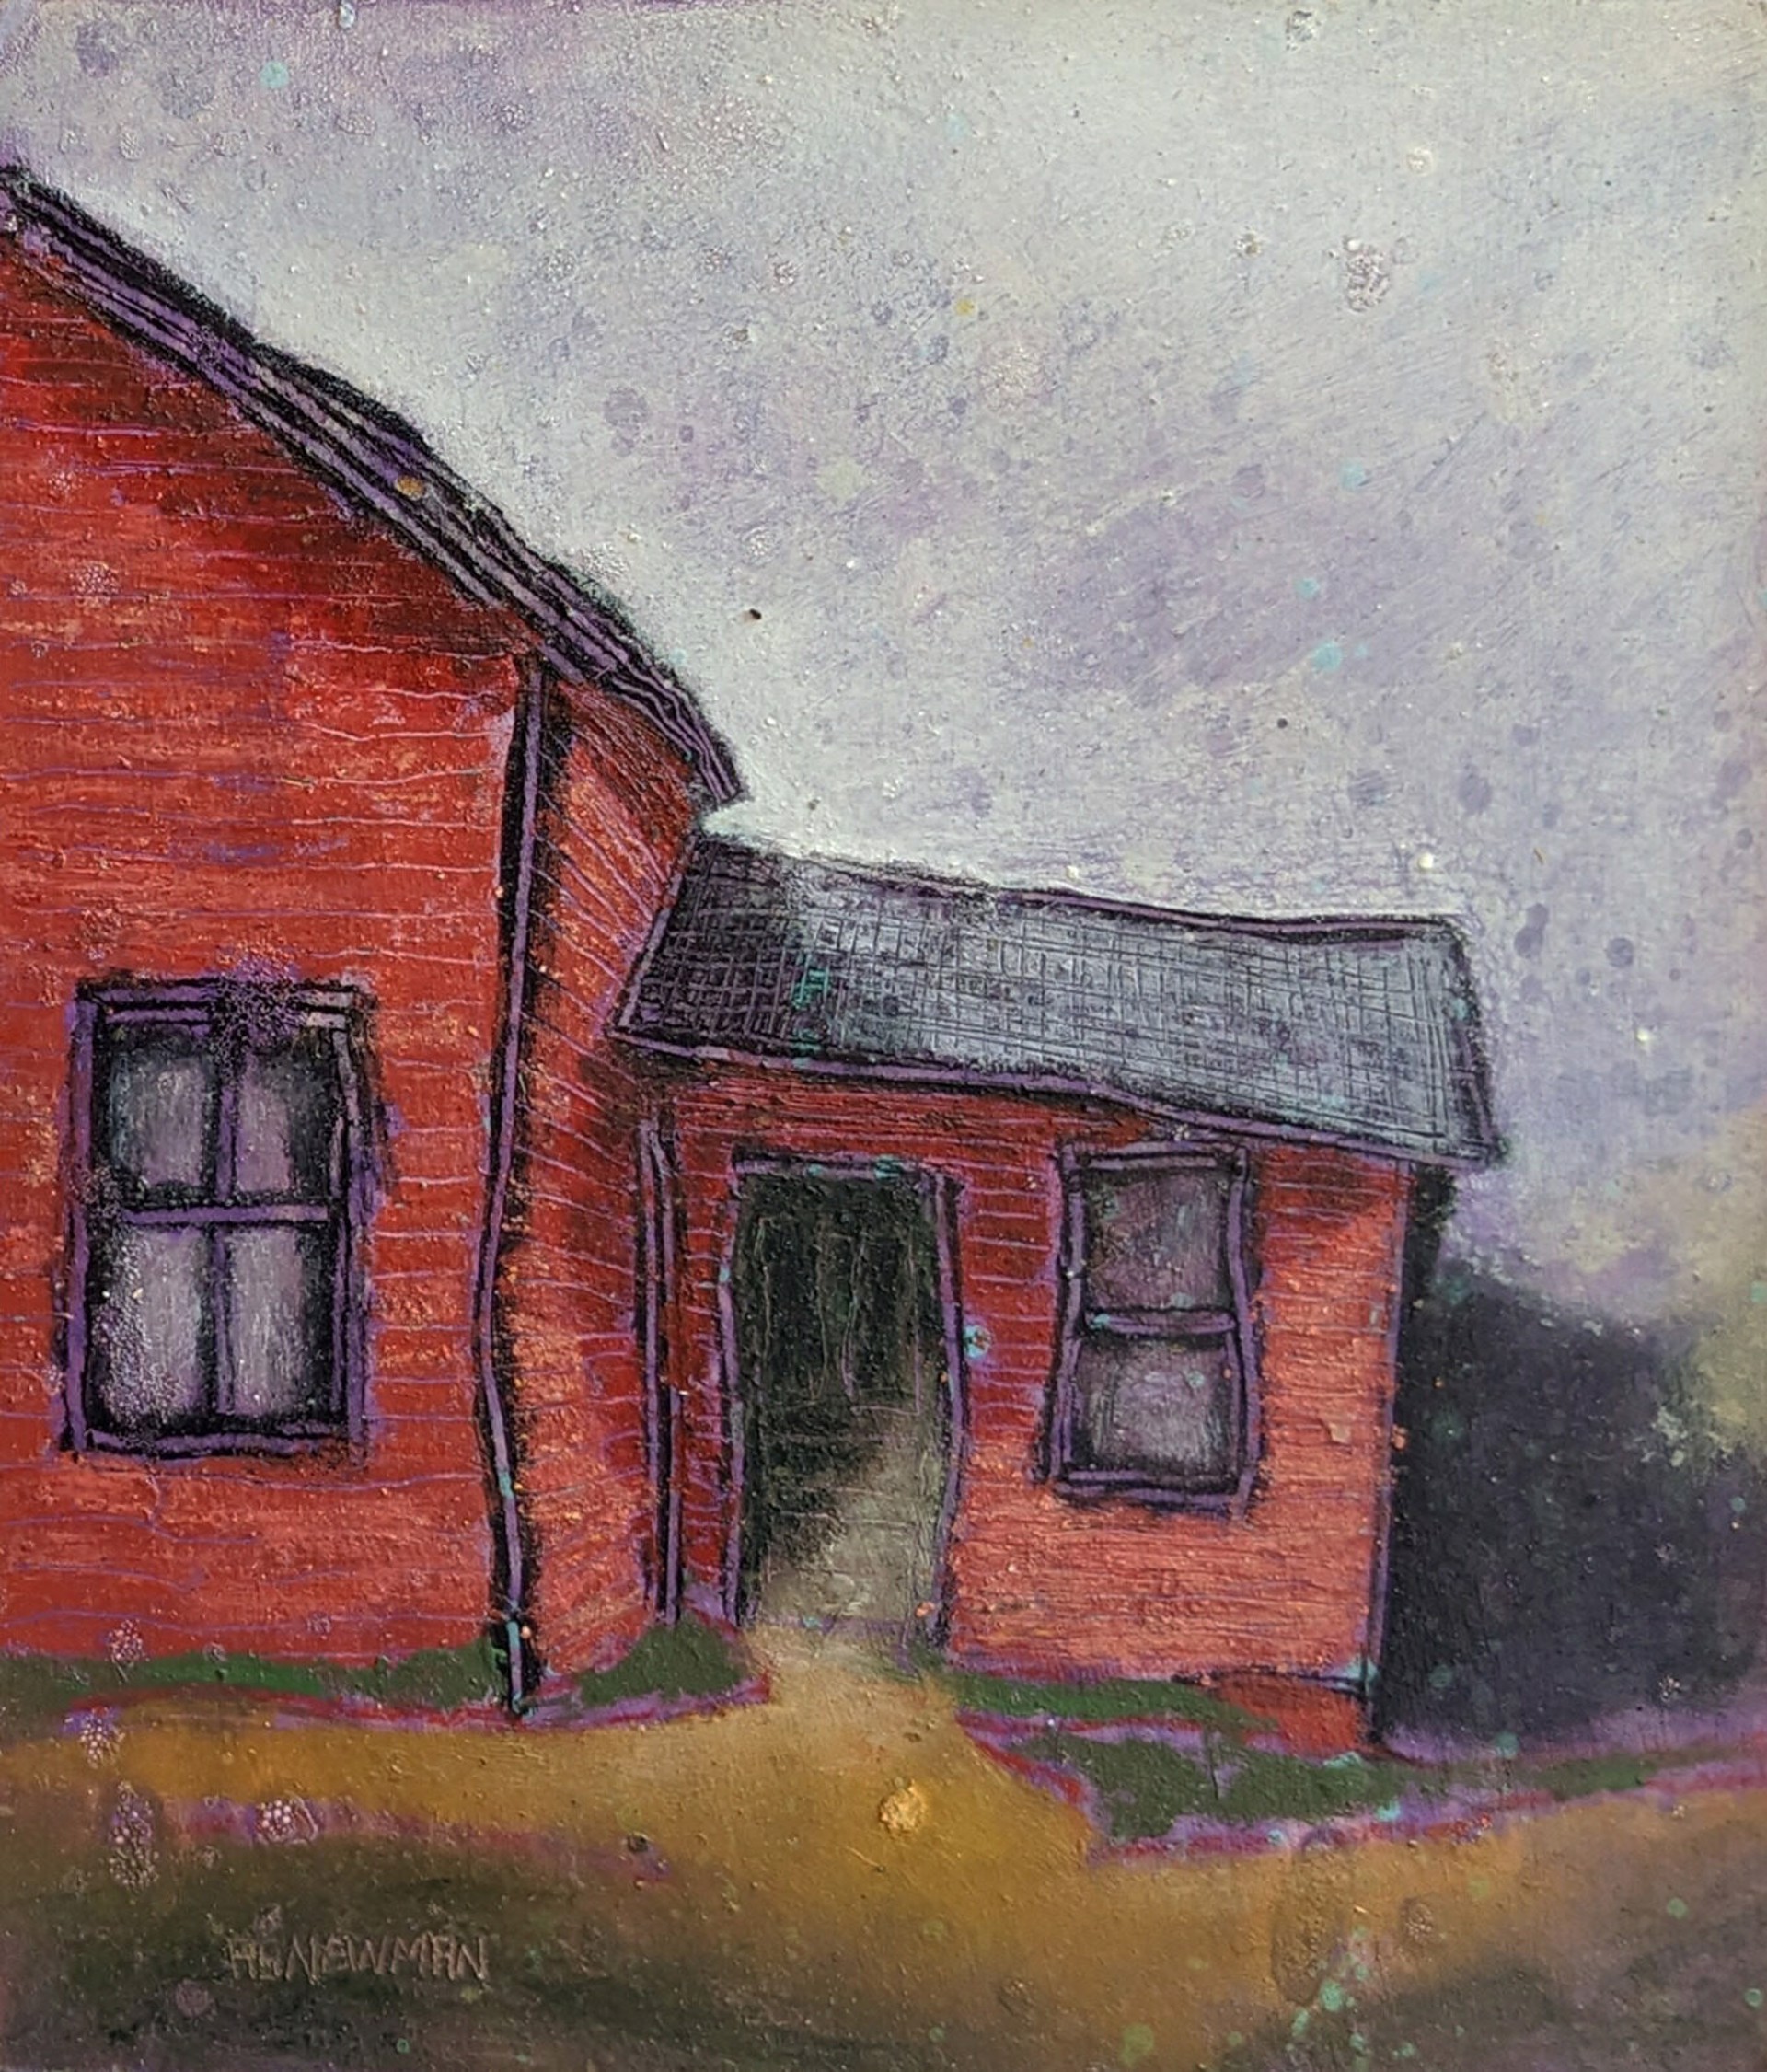 Right Side of a House (Dalton) by Andy Newman